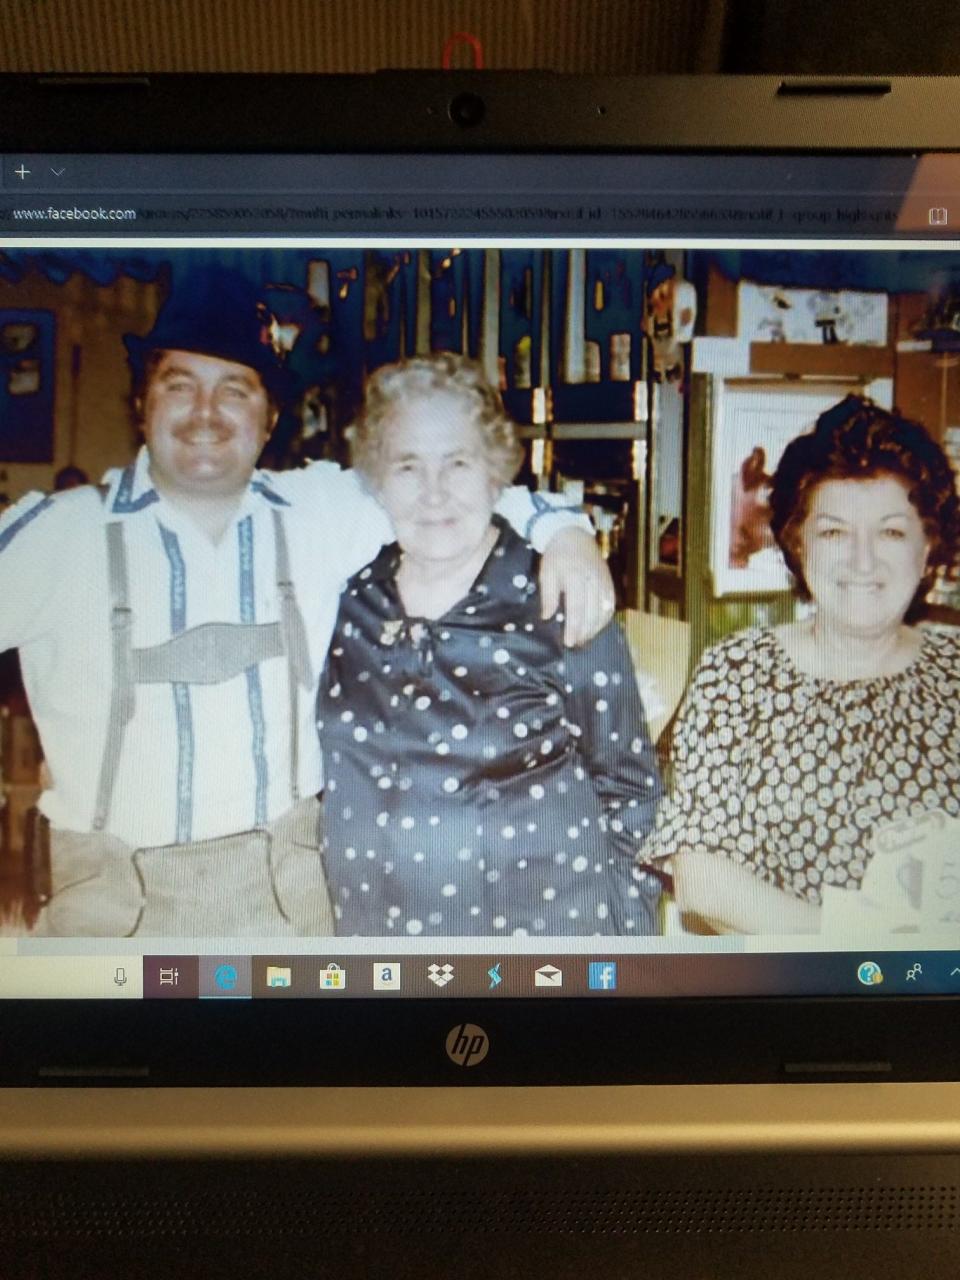 John Miller, Emmy's mother Mutti and Irene, a waitress at the restaurant.